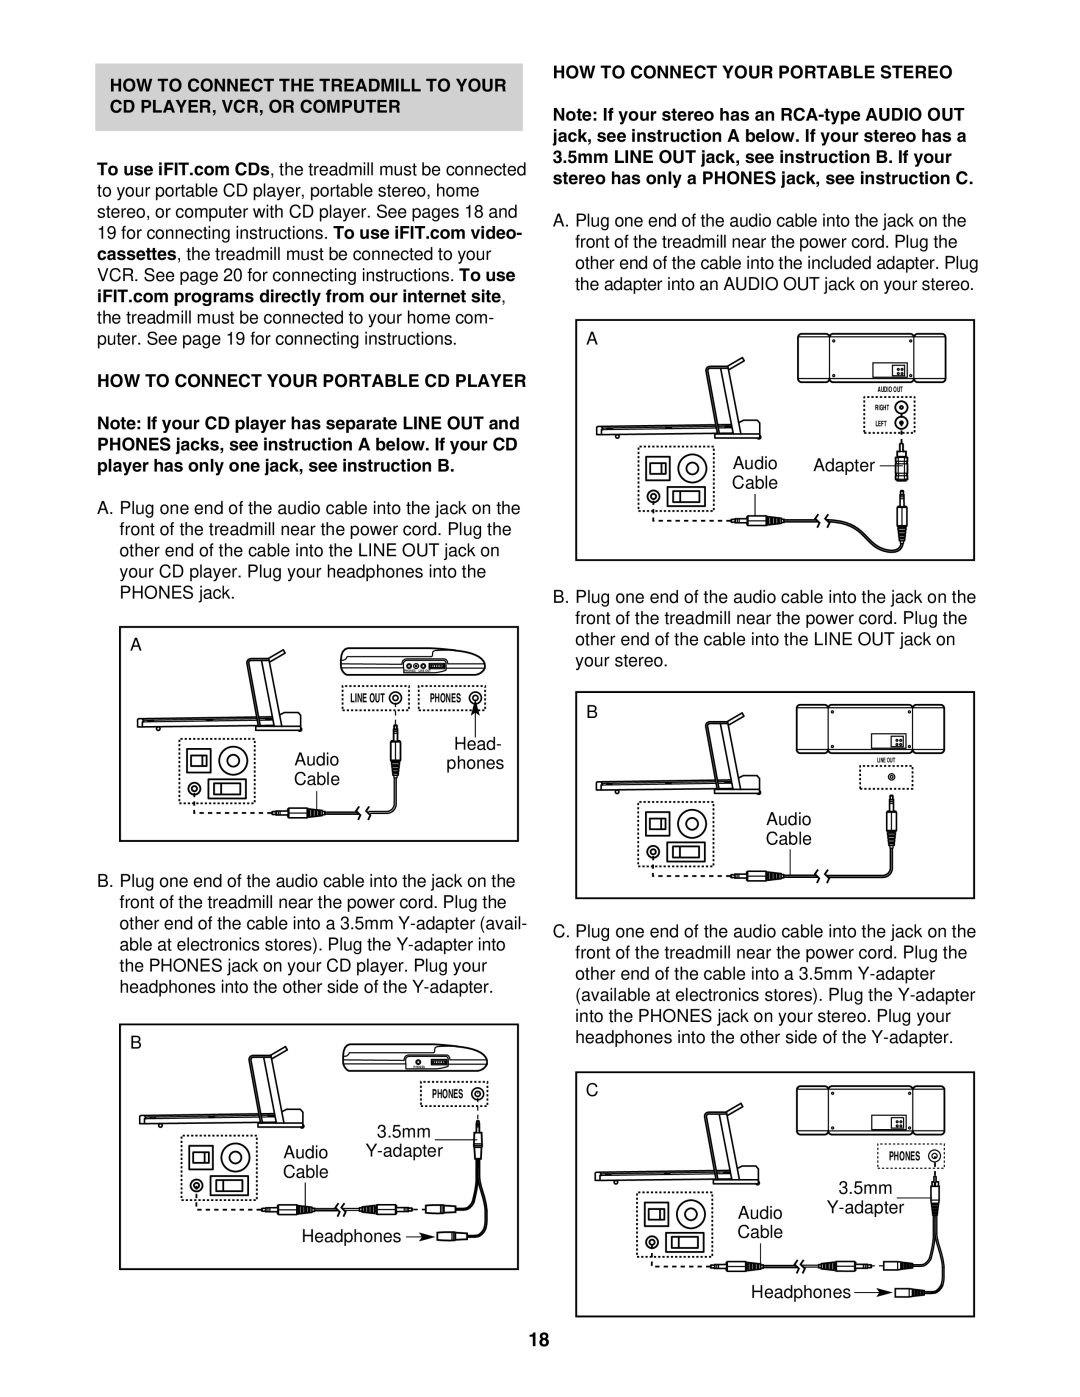 ProForm DTL52942 user manual HOW to Connect Your Portable Stereo 